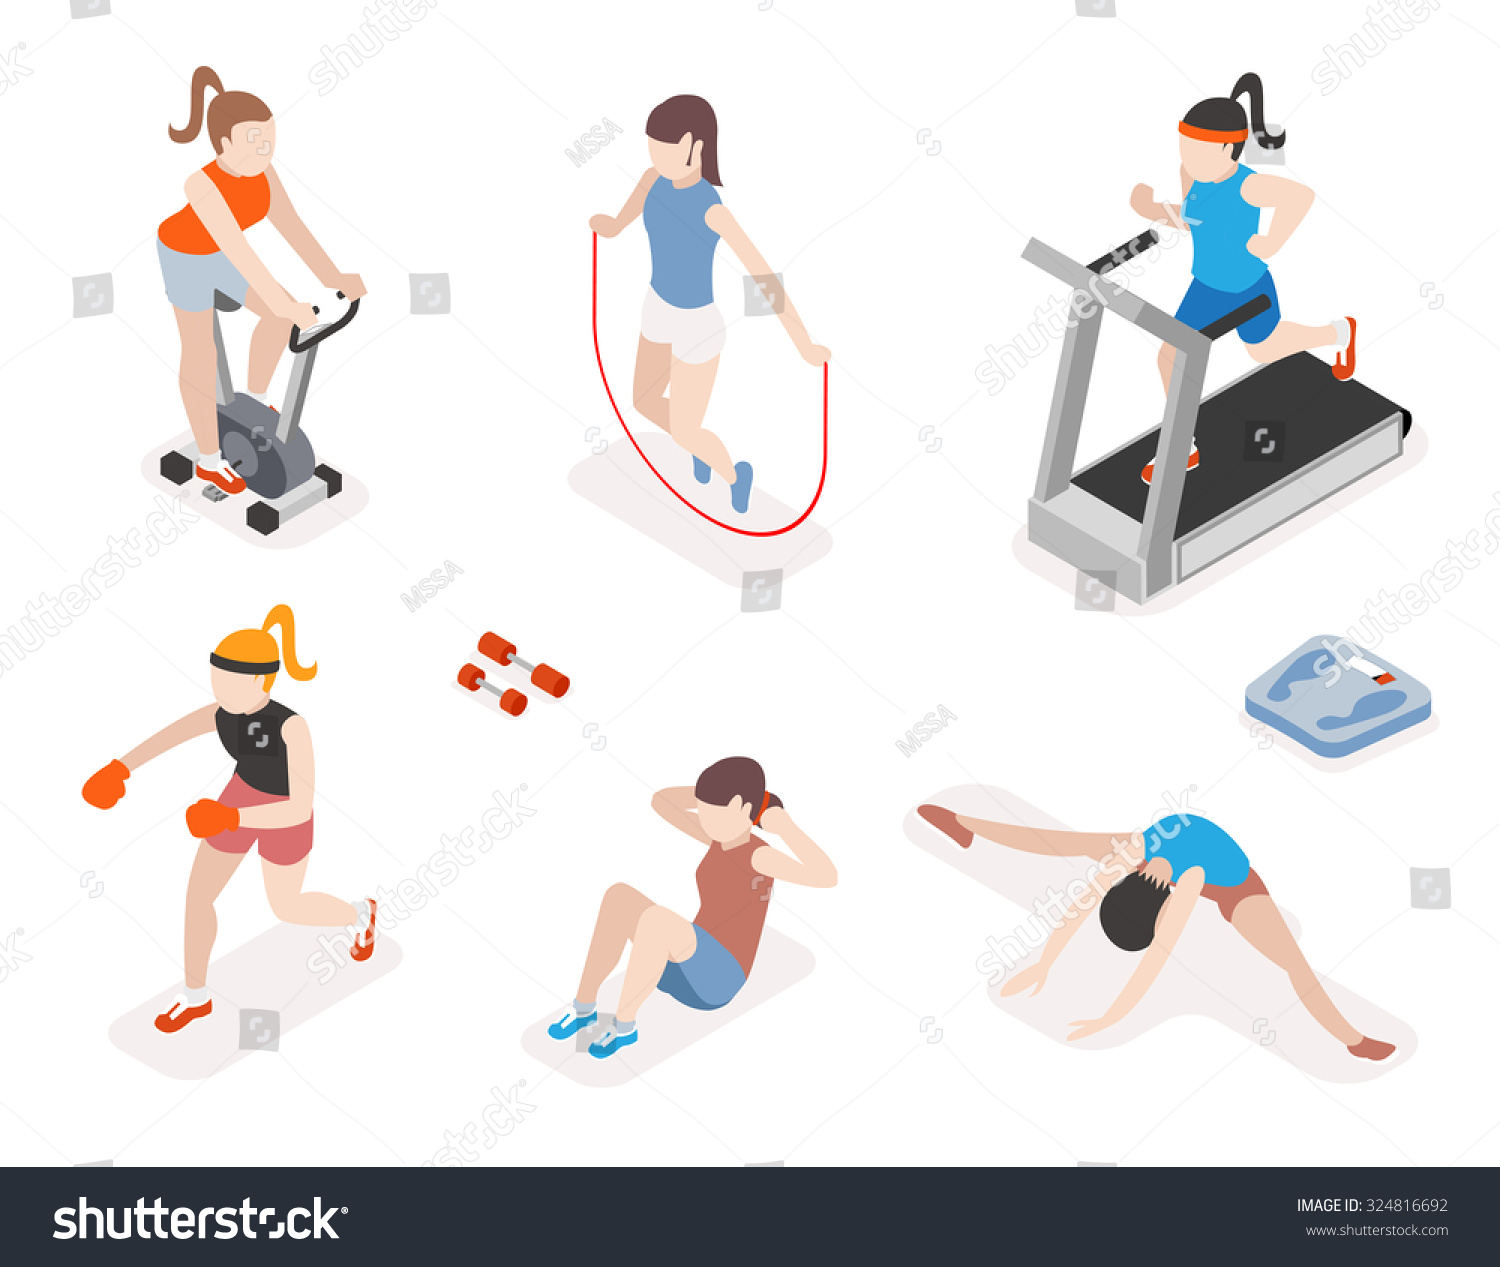 Fitness Women In Gym, Gymnastics Workout And Yoga Exercises. 3d